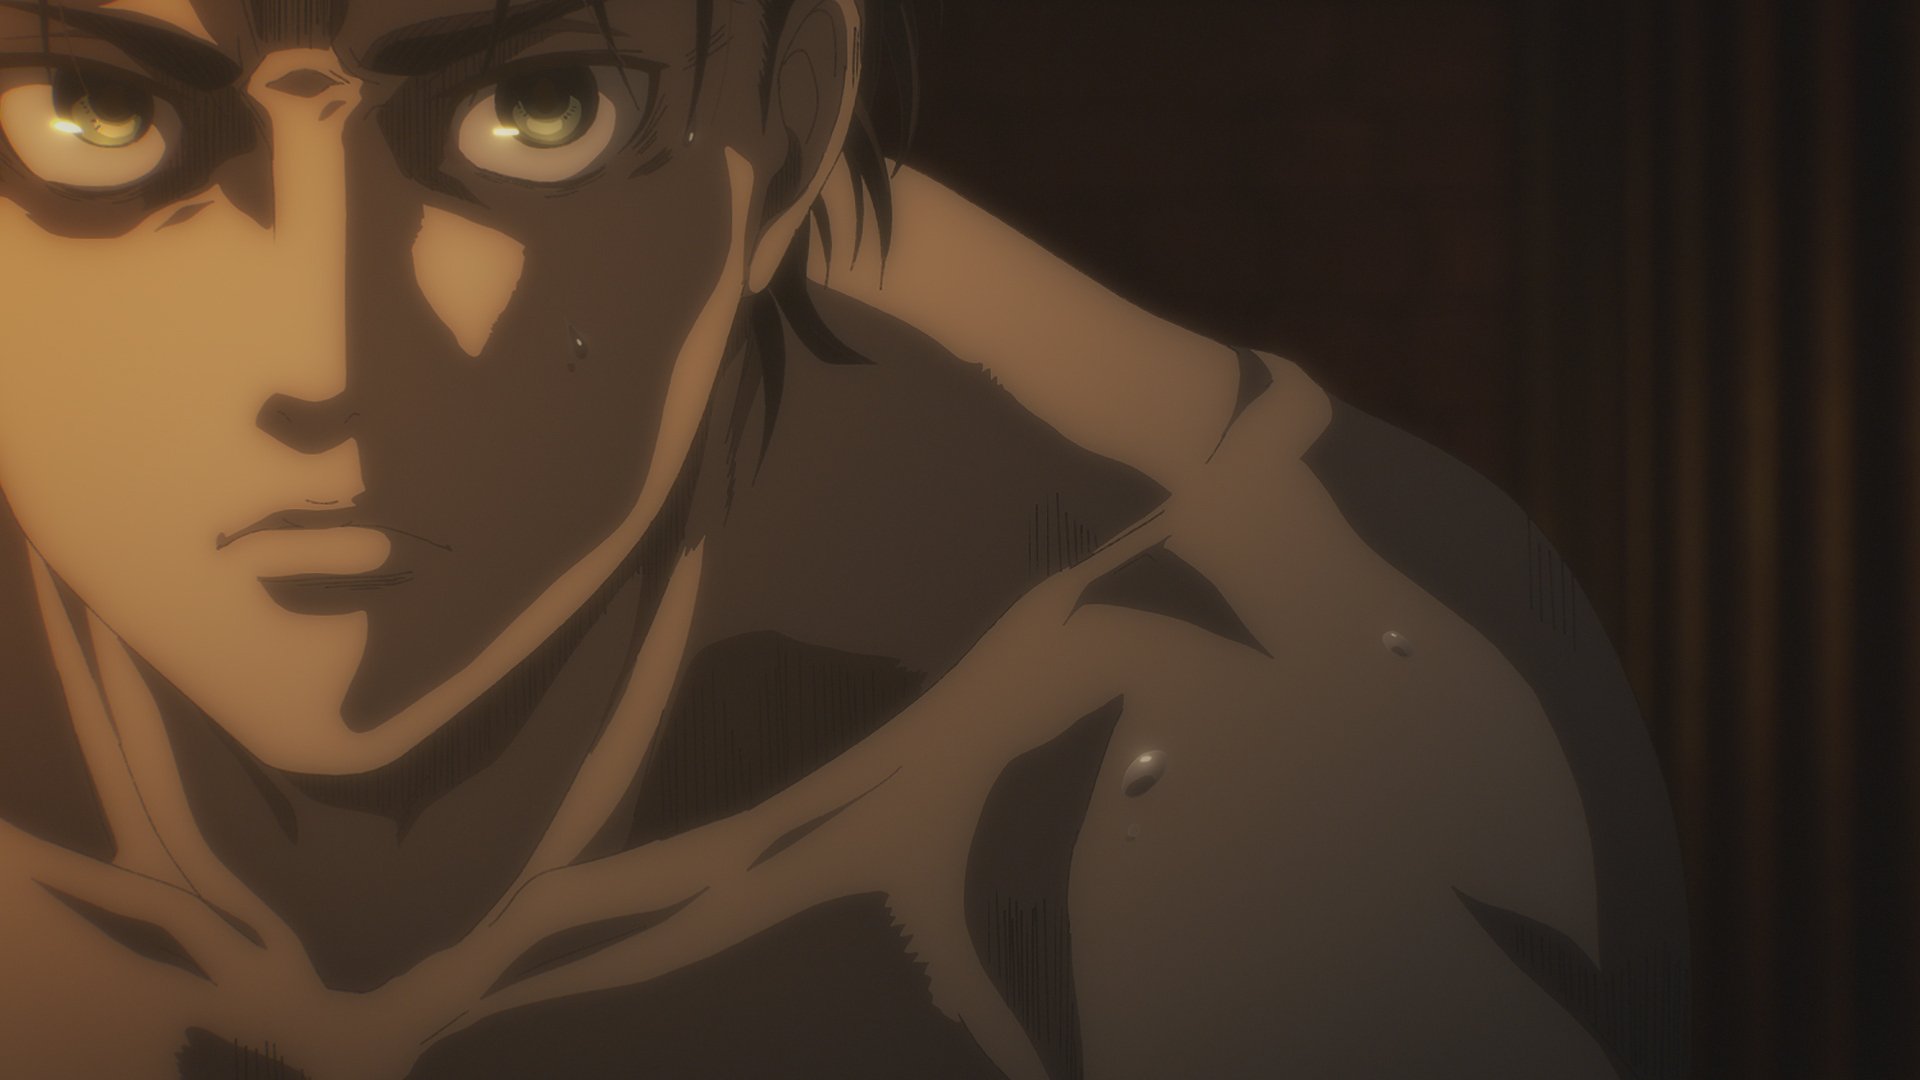 Attack on Titan' Fans Are Worried About Levi Ackerman After the Anime's  Season 4B Trailer